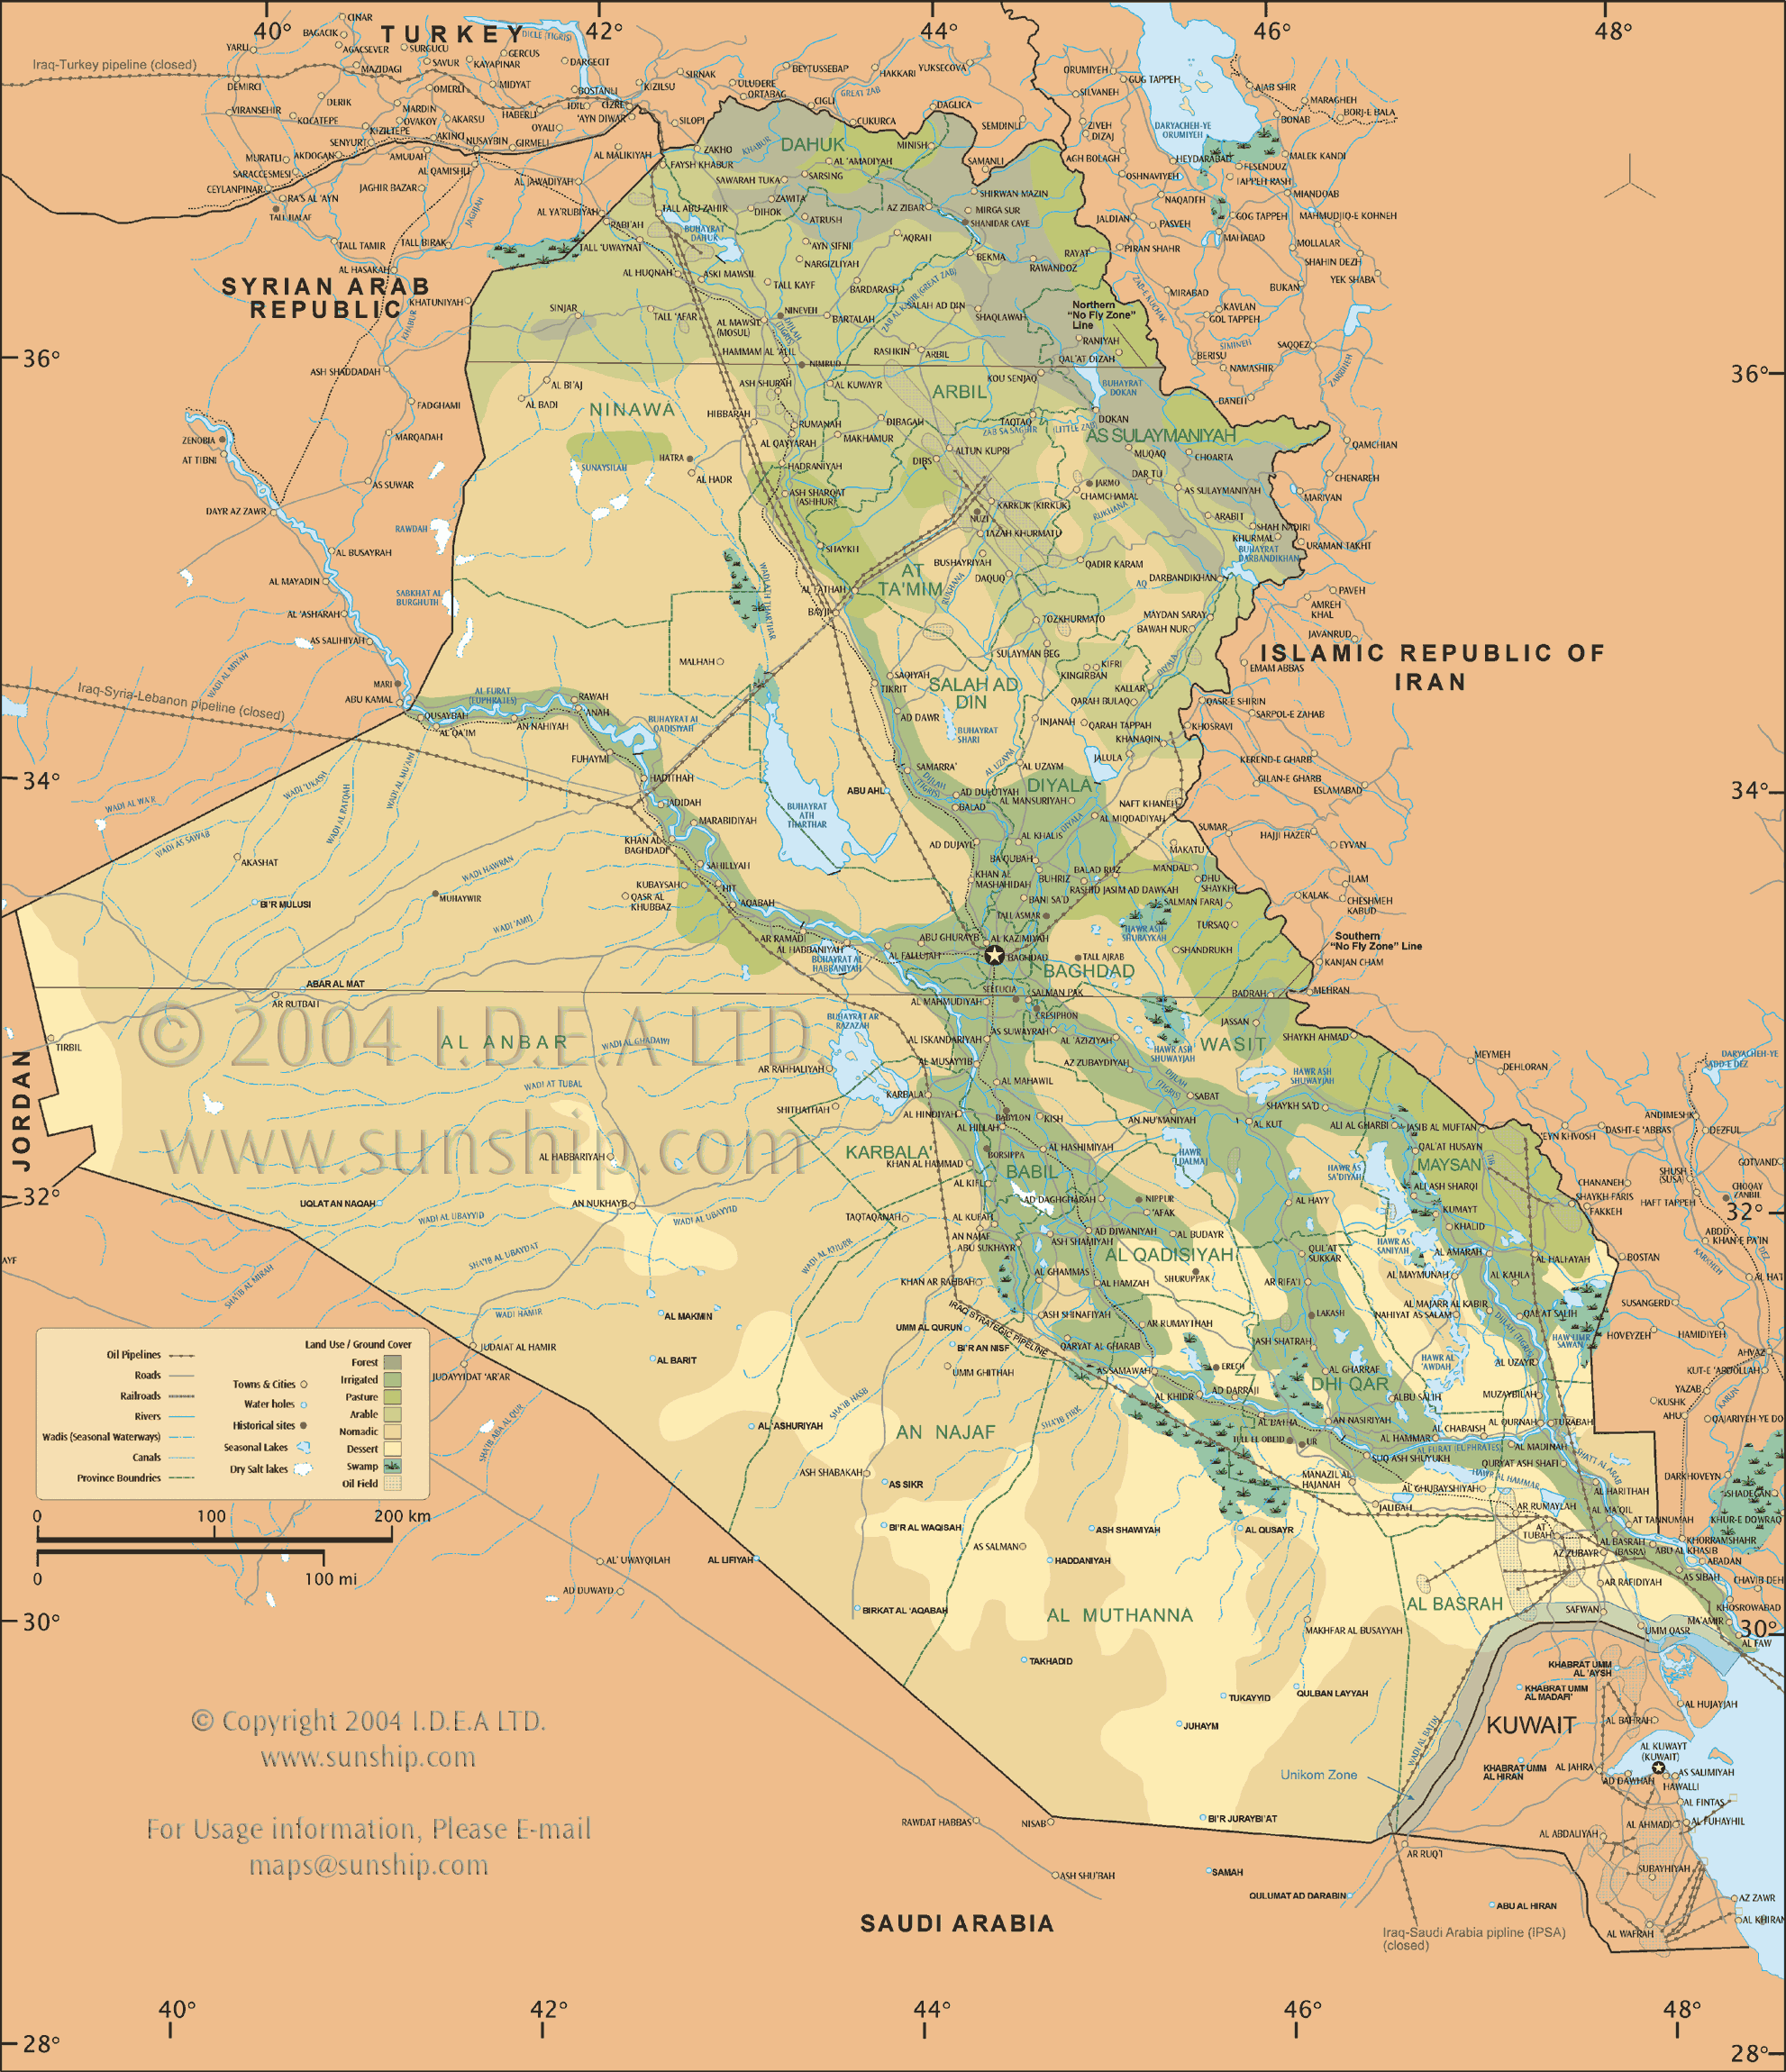 Maps of the Middle East - Iraq - 2004